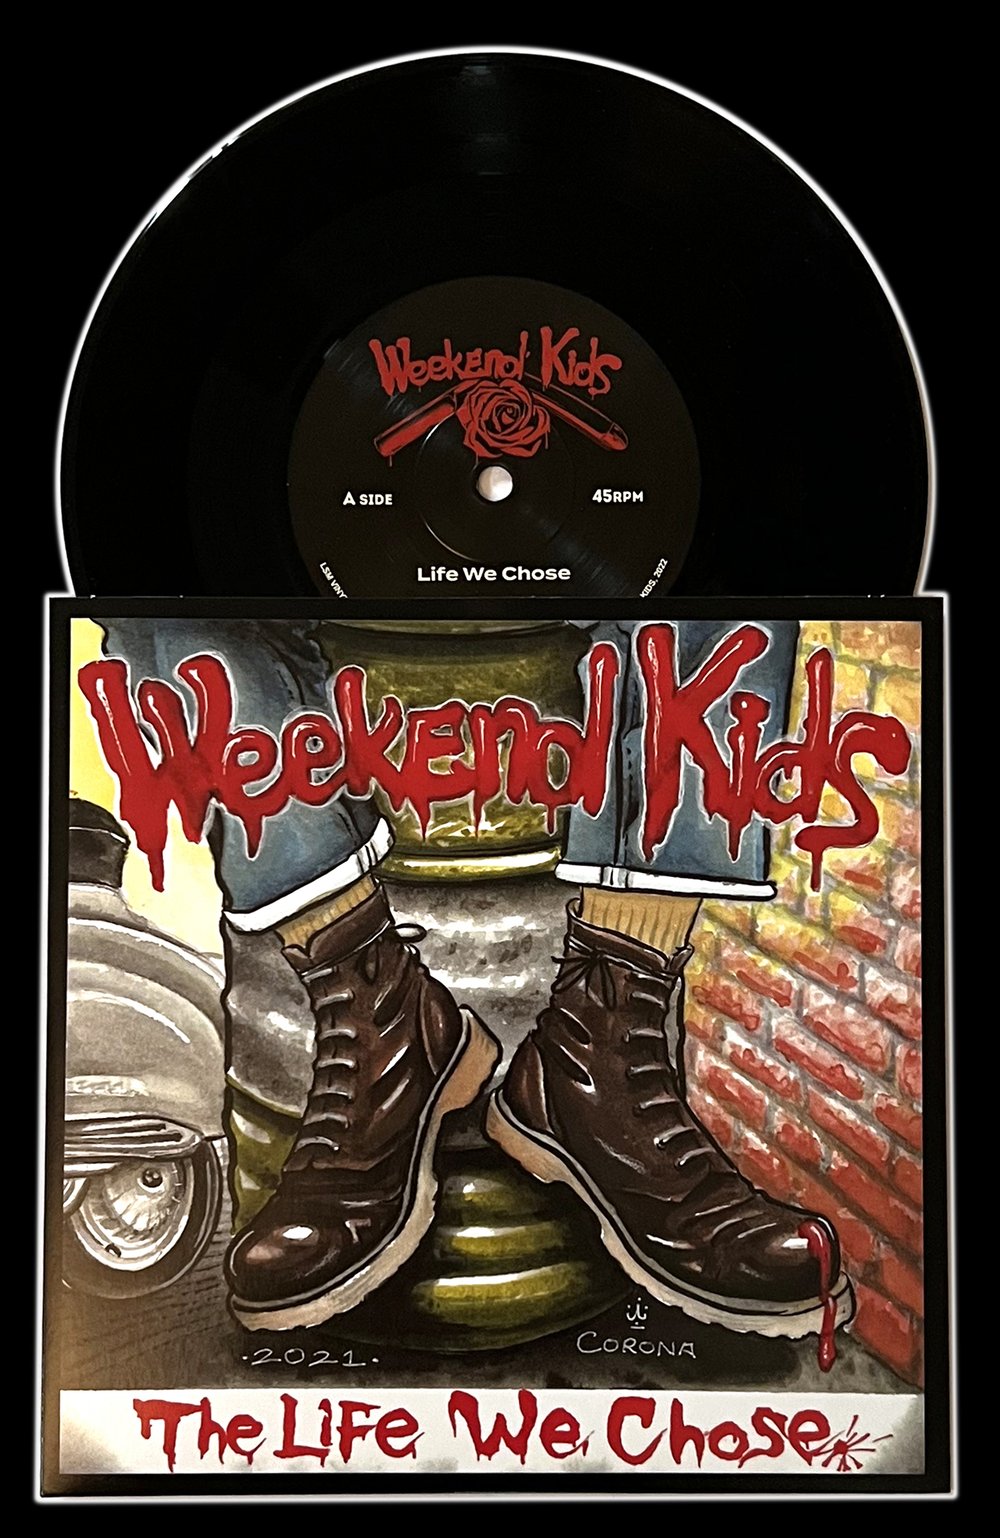 WEEKEND KIDS 'The Life We Chose' 7" EP